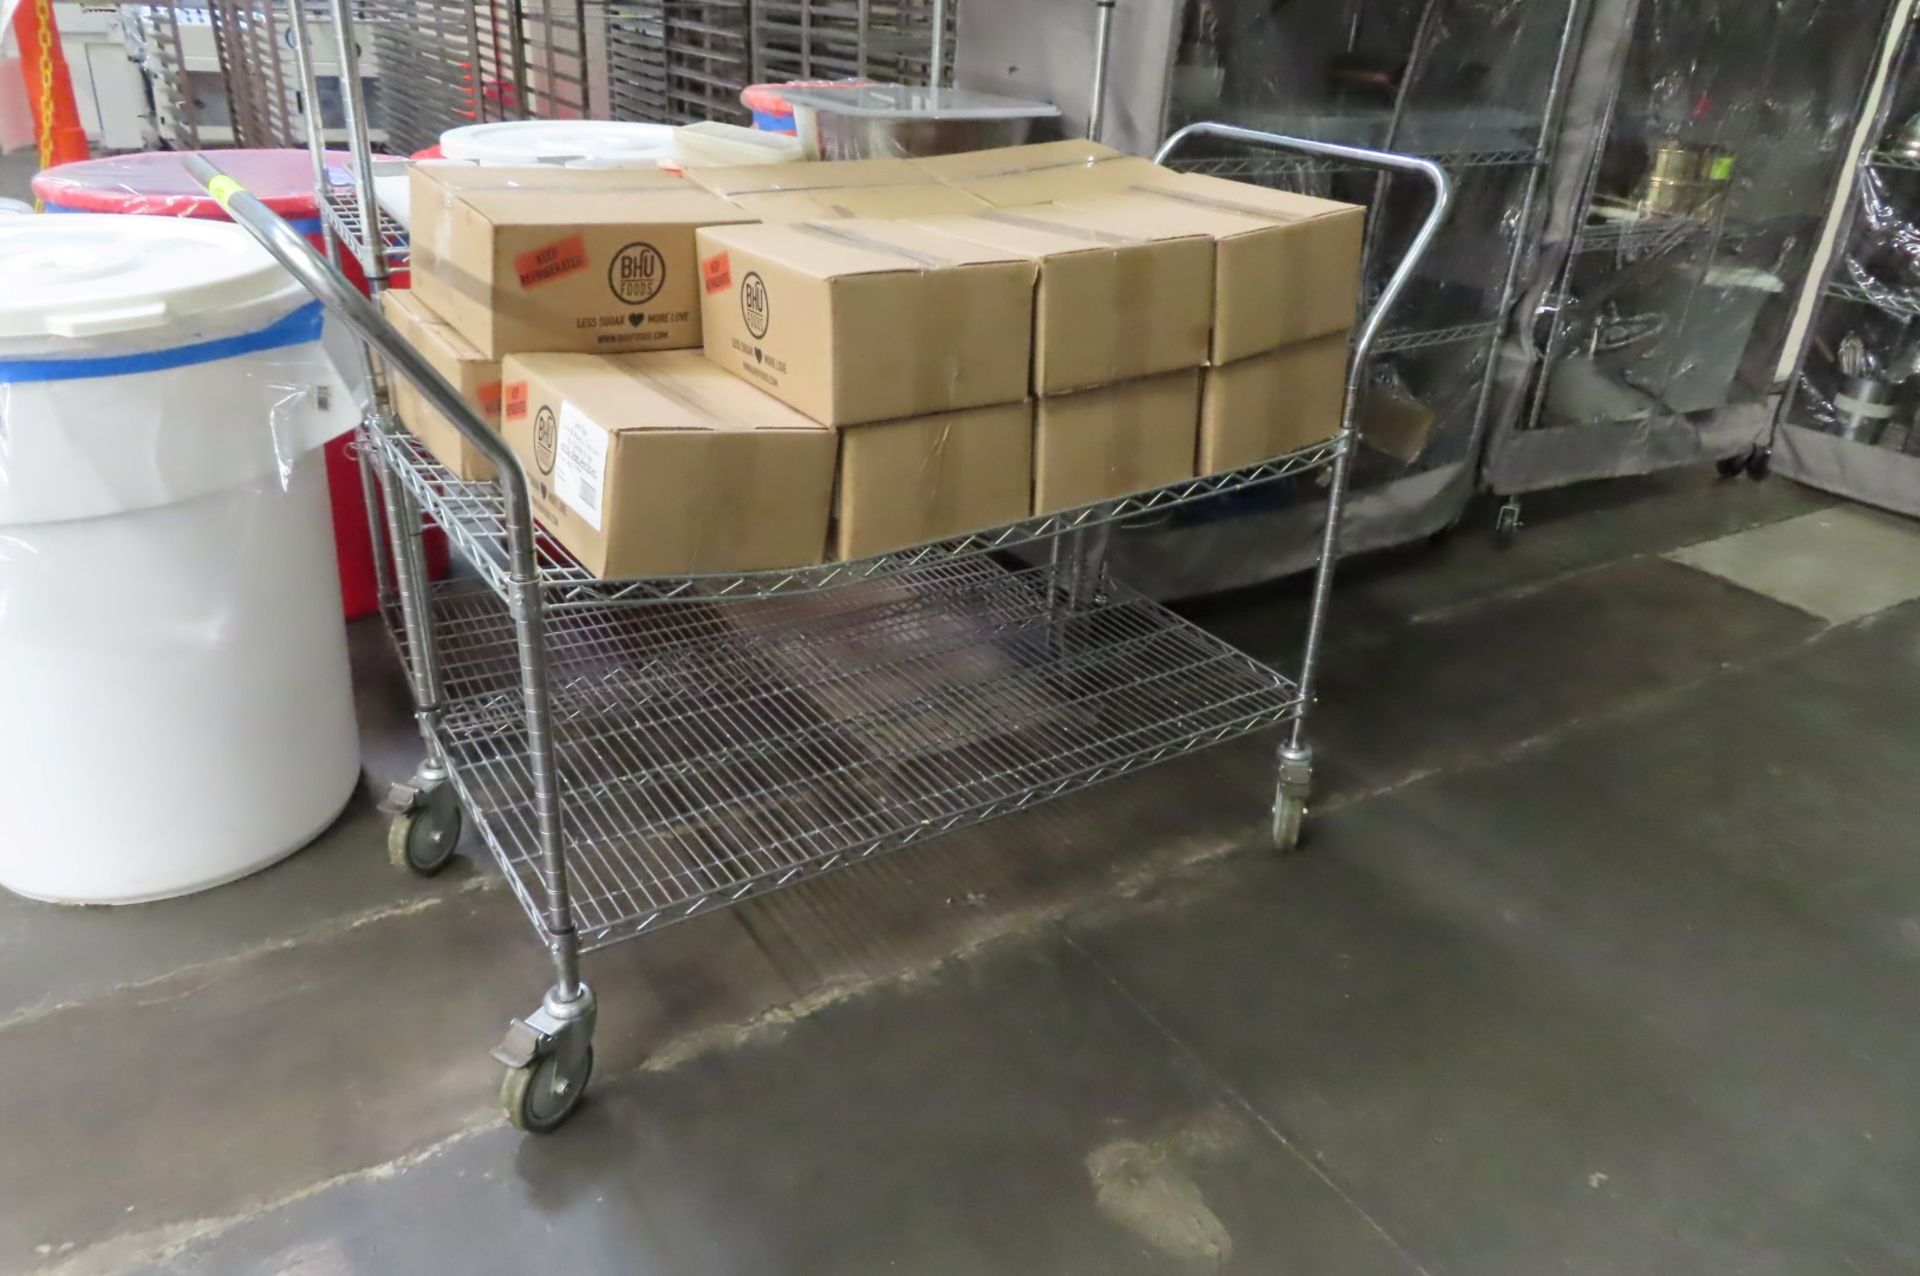 Stainless Carts